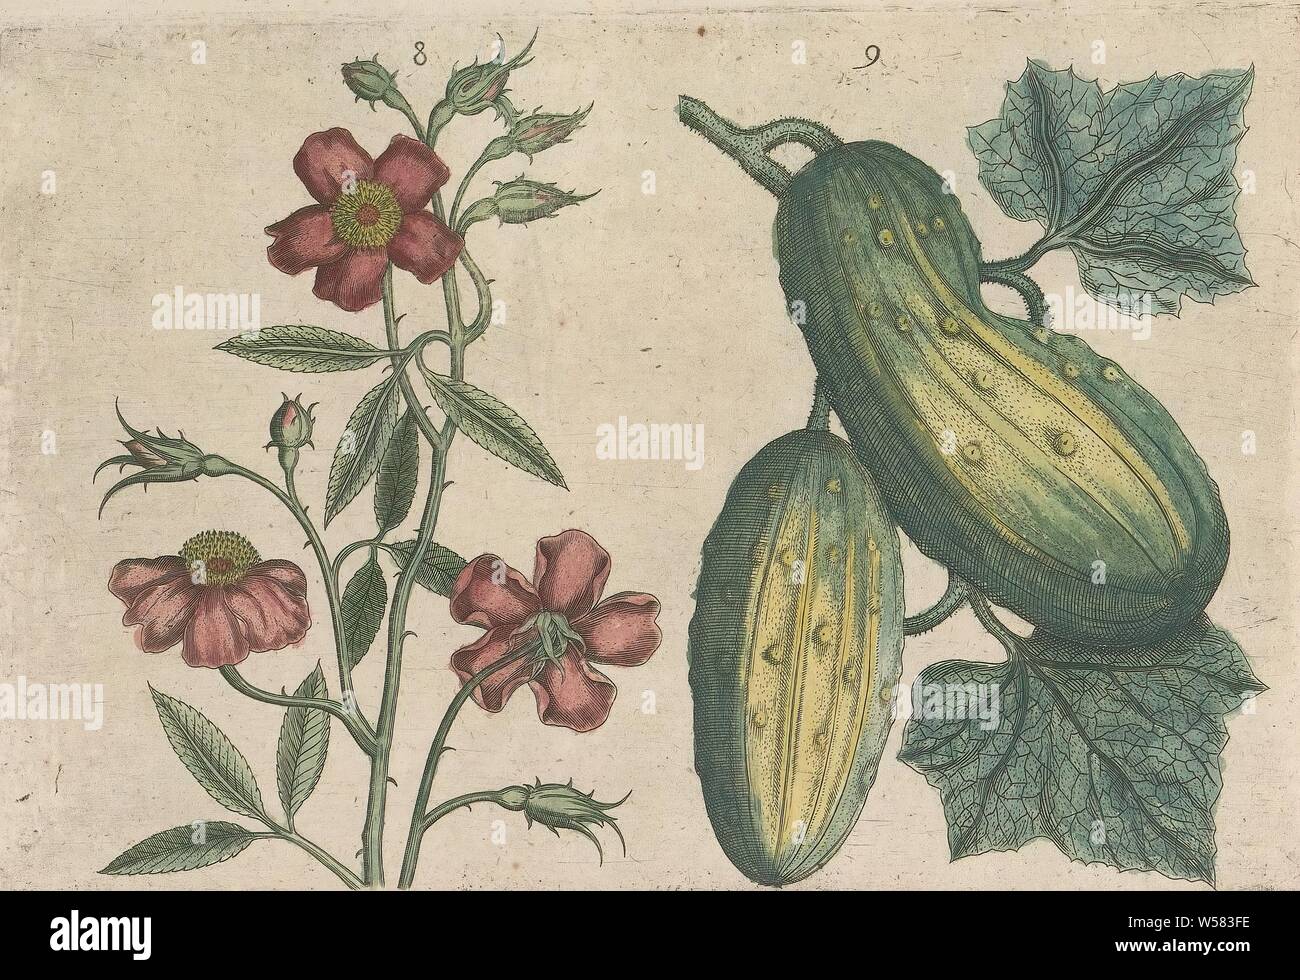 Musk rose (Rosa moschata) and cucumber (Cucumis sativus), Musk rose and cucumber. FIGs. 8 and 9 on a sheet hand numbered 5. In: Anselmi Boetii de Boot I.C. Brugensis & Rodolphi II. Imp. Novel. medici a cubiculis Florum, Herbarum, ac fructuum selectiorum icones, & vires pleraeque hactenus ignotæ. Part of the album with sheets and plates from De Boodt's herbarium from 1640. The twelfth of twelve albums with watercolors of animals, birds and plants known around 1600, commissioned by Emperor Rudolf II, flowers: rose, anonymous, 1604 - 1632 and/or 1640, paper, ink, watercolor (paint), engraving Stock Photo